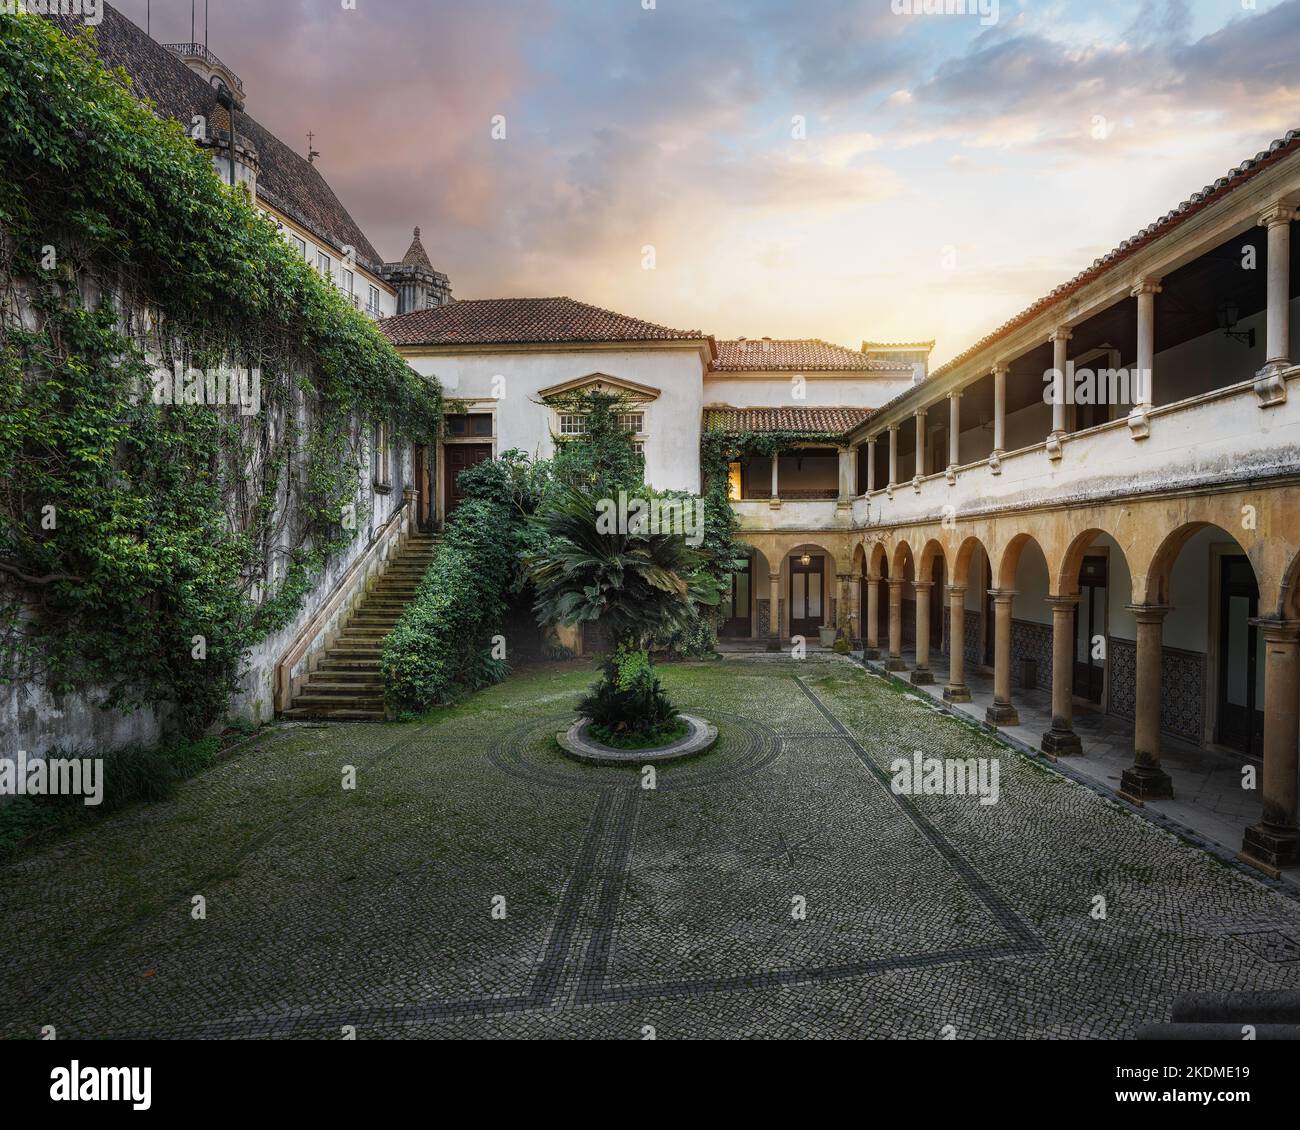 Melos House Courtyard (Faculty of Law) at University of Coimbra - Coimbra, Portugal Stock Photo